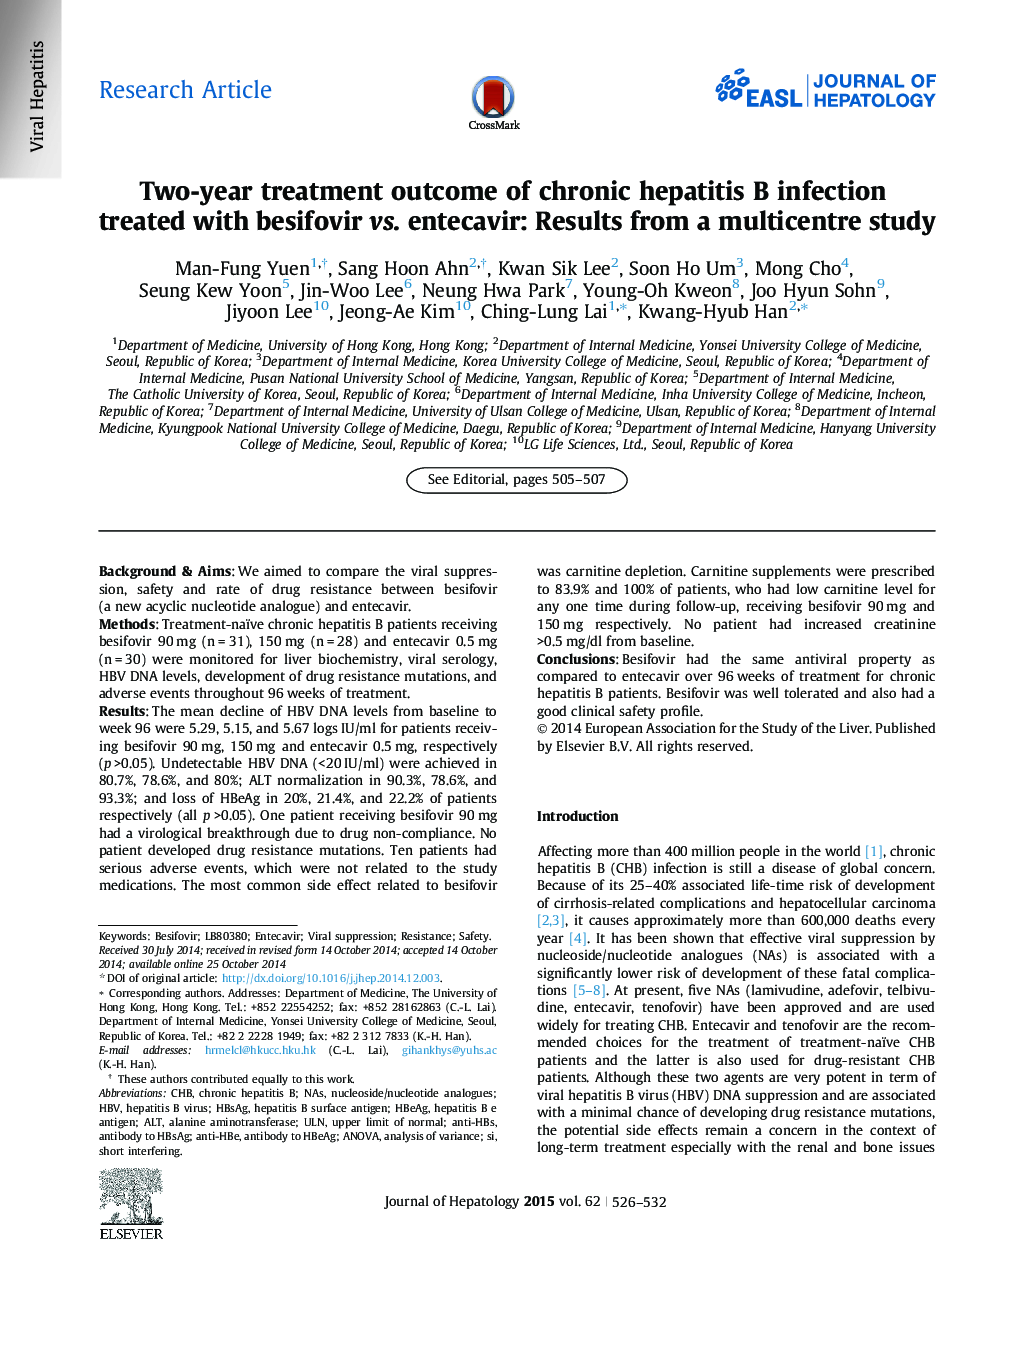 Research ArticleTwo-year treatment outcome of chronic hepatitis B infection treated with besifovir vs. entecavir: Results from a multicentre study